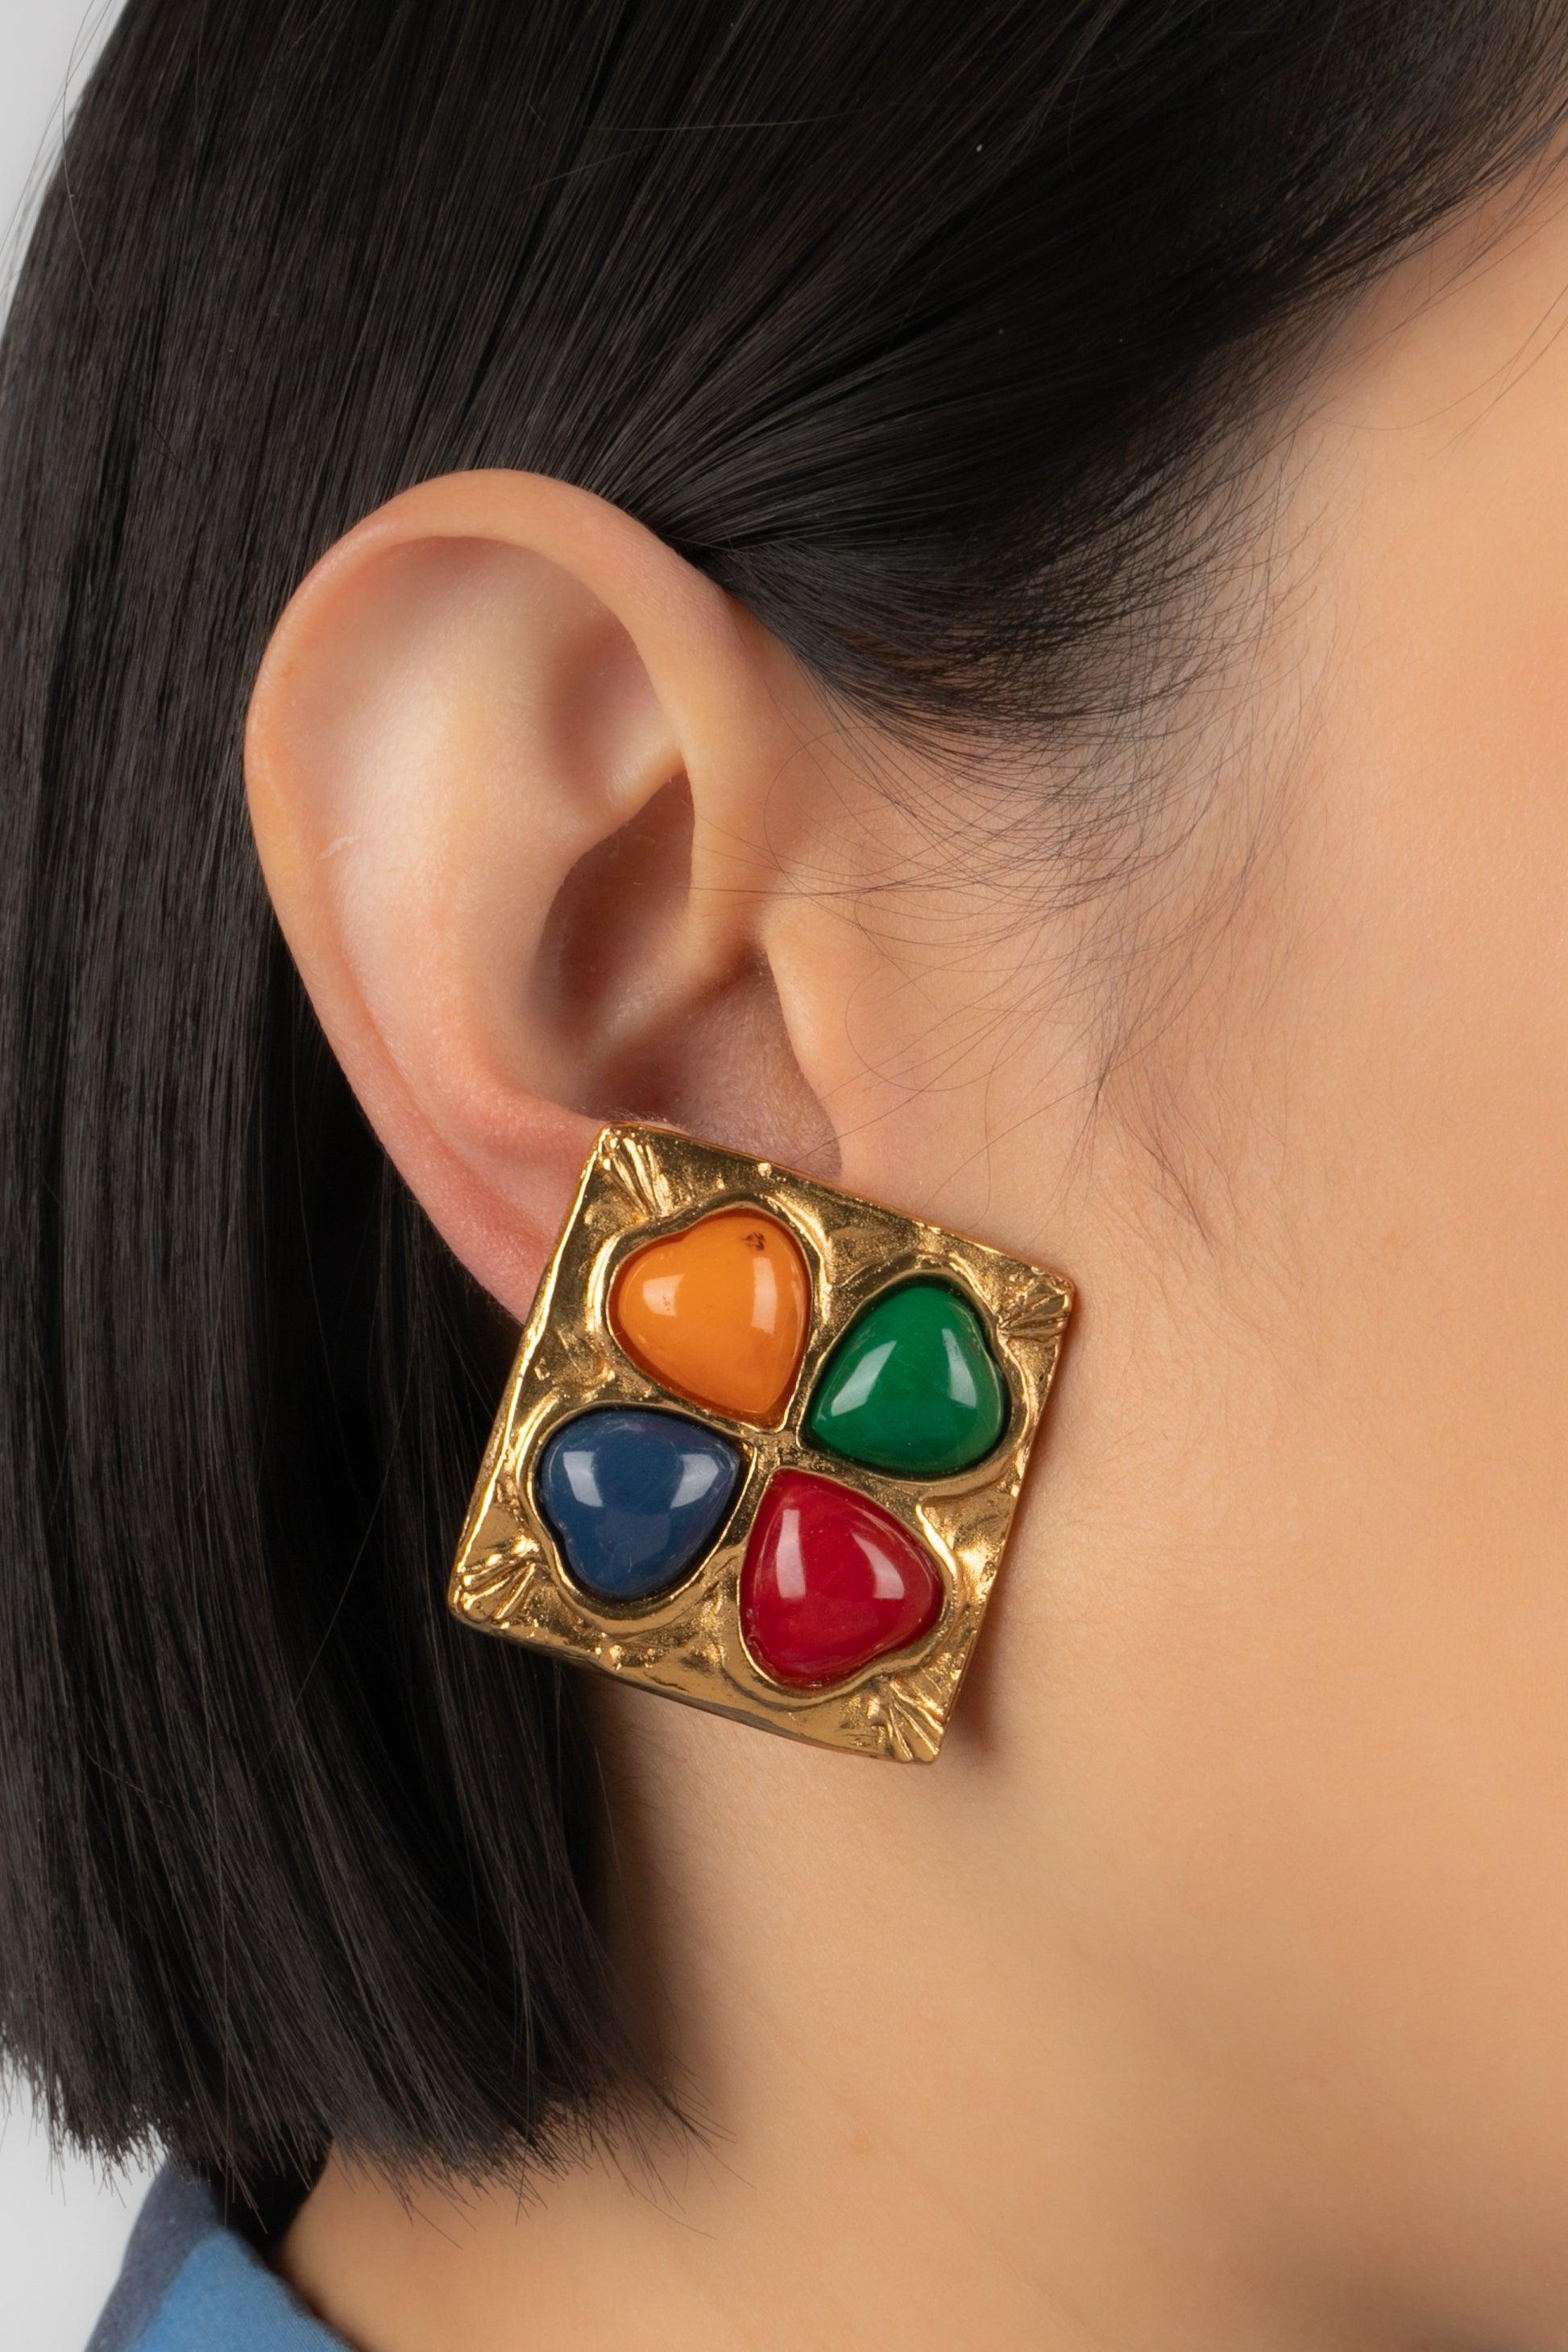 Yves Saint Laurent - (Made in France) Golden metal clip-on earrings with glass paste cabochons. Jewelry from the middle of the 1980s.

Additional information:
Condition: Very good condition
Dimensions: 5 cm x 5 cm
Period: 20th Century

Seller